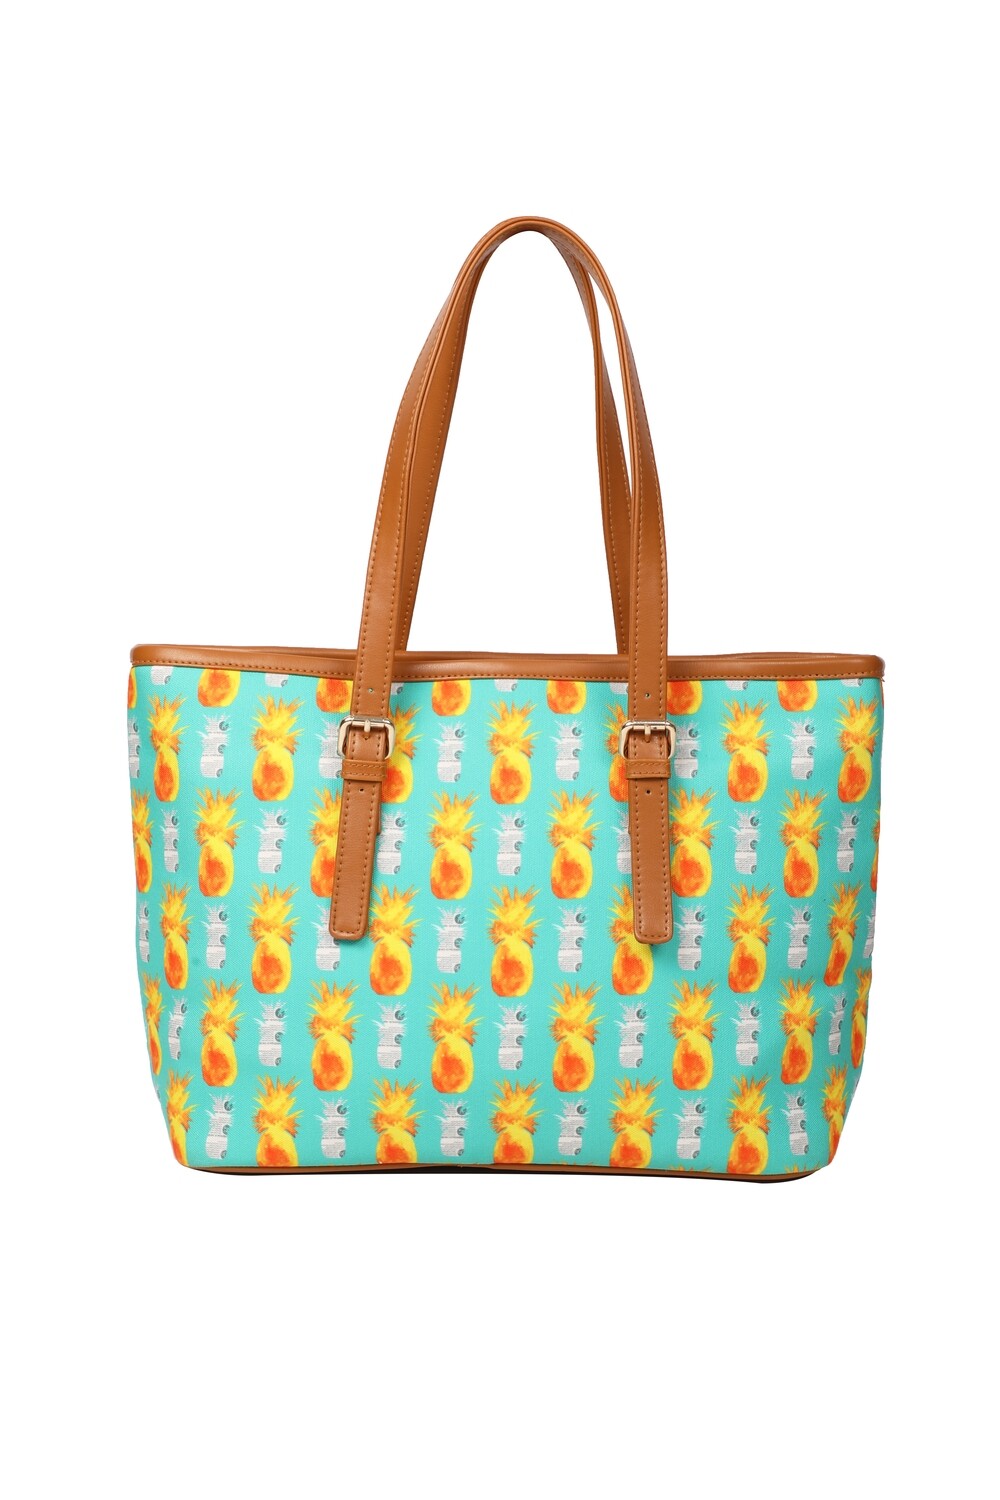 Mint large tote bag with Pineapple Print